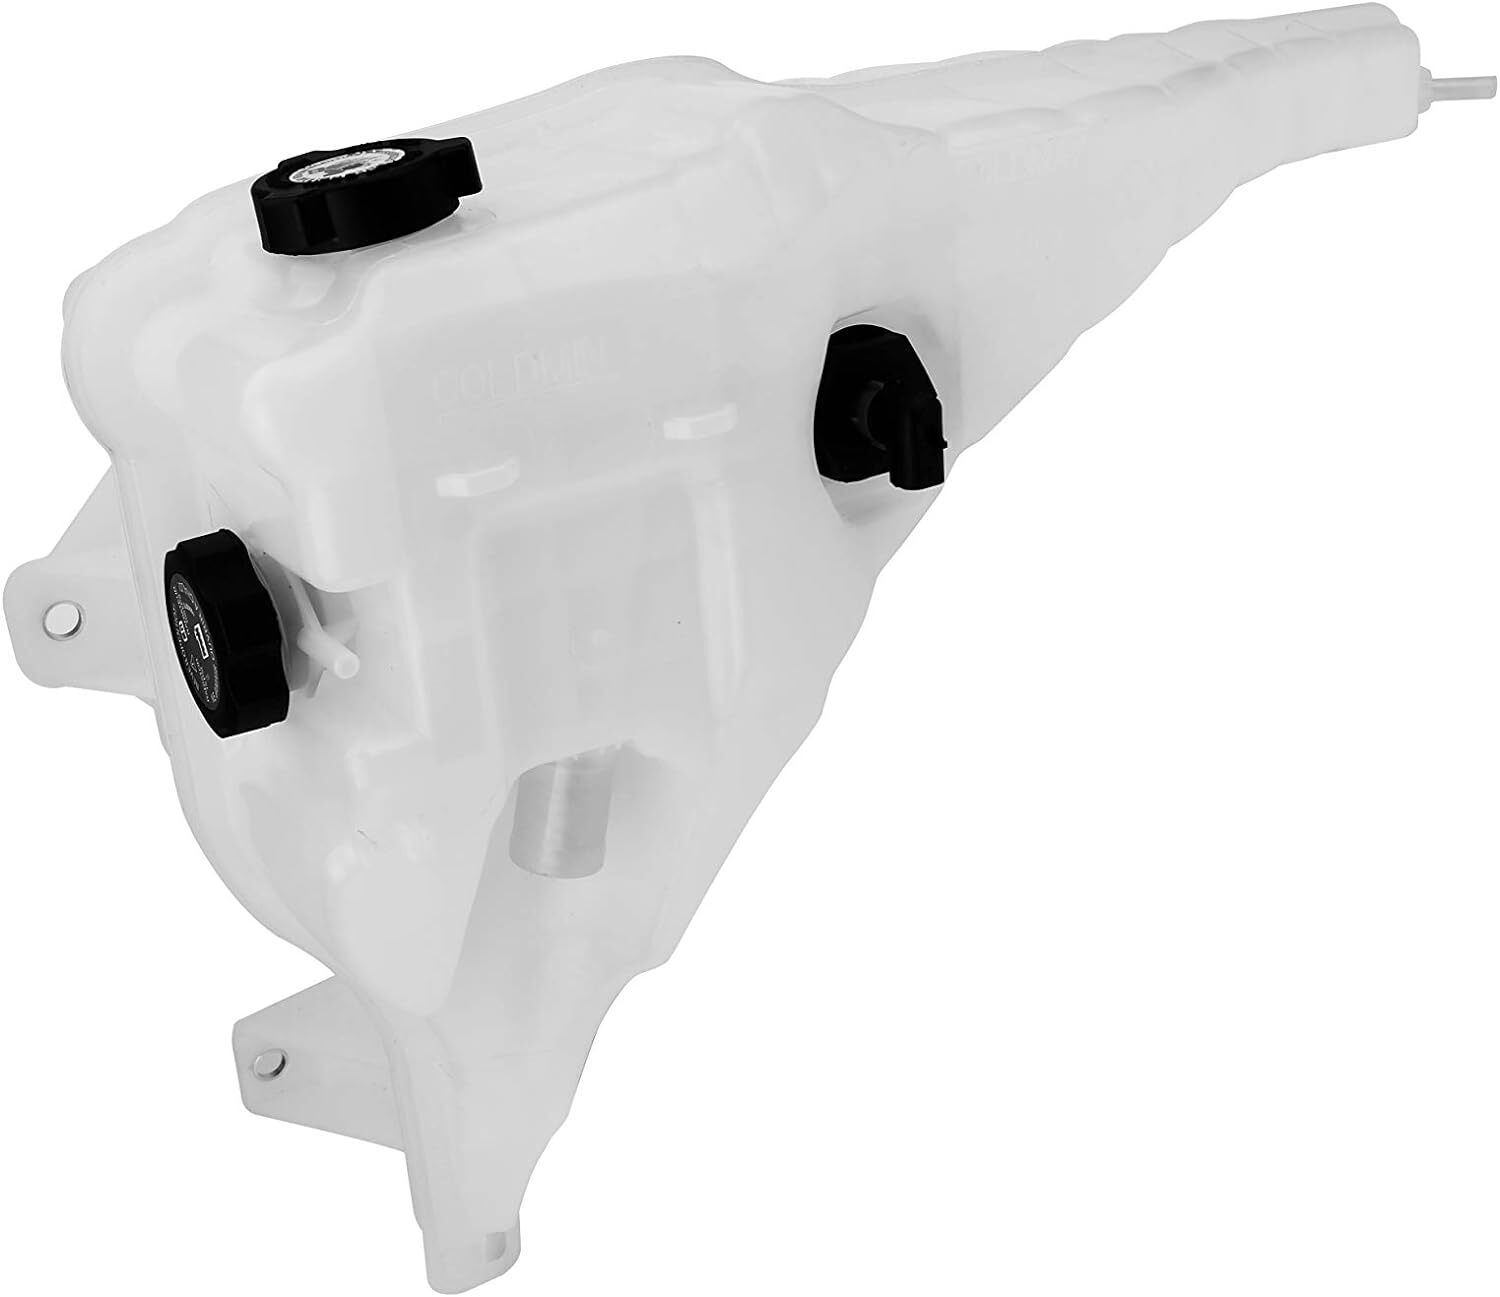 Replacement Coolant Reservoir Tank - Compatible with Freightliner Vehicles